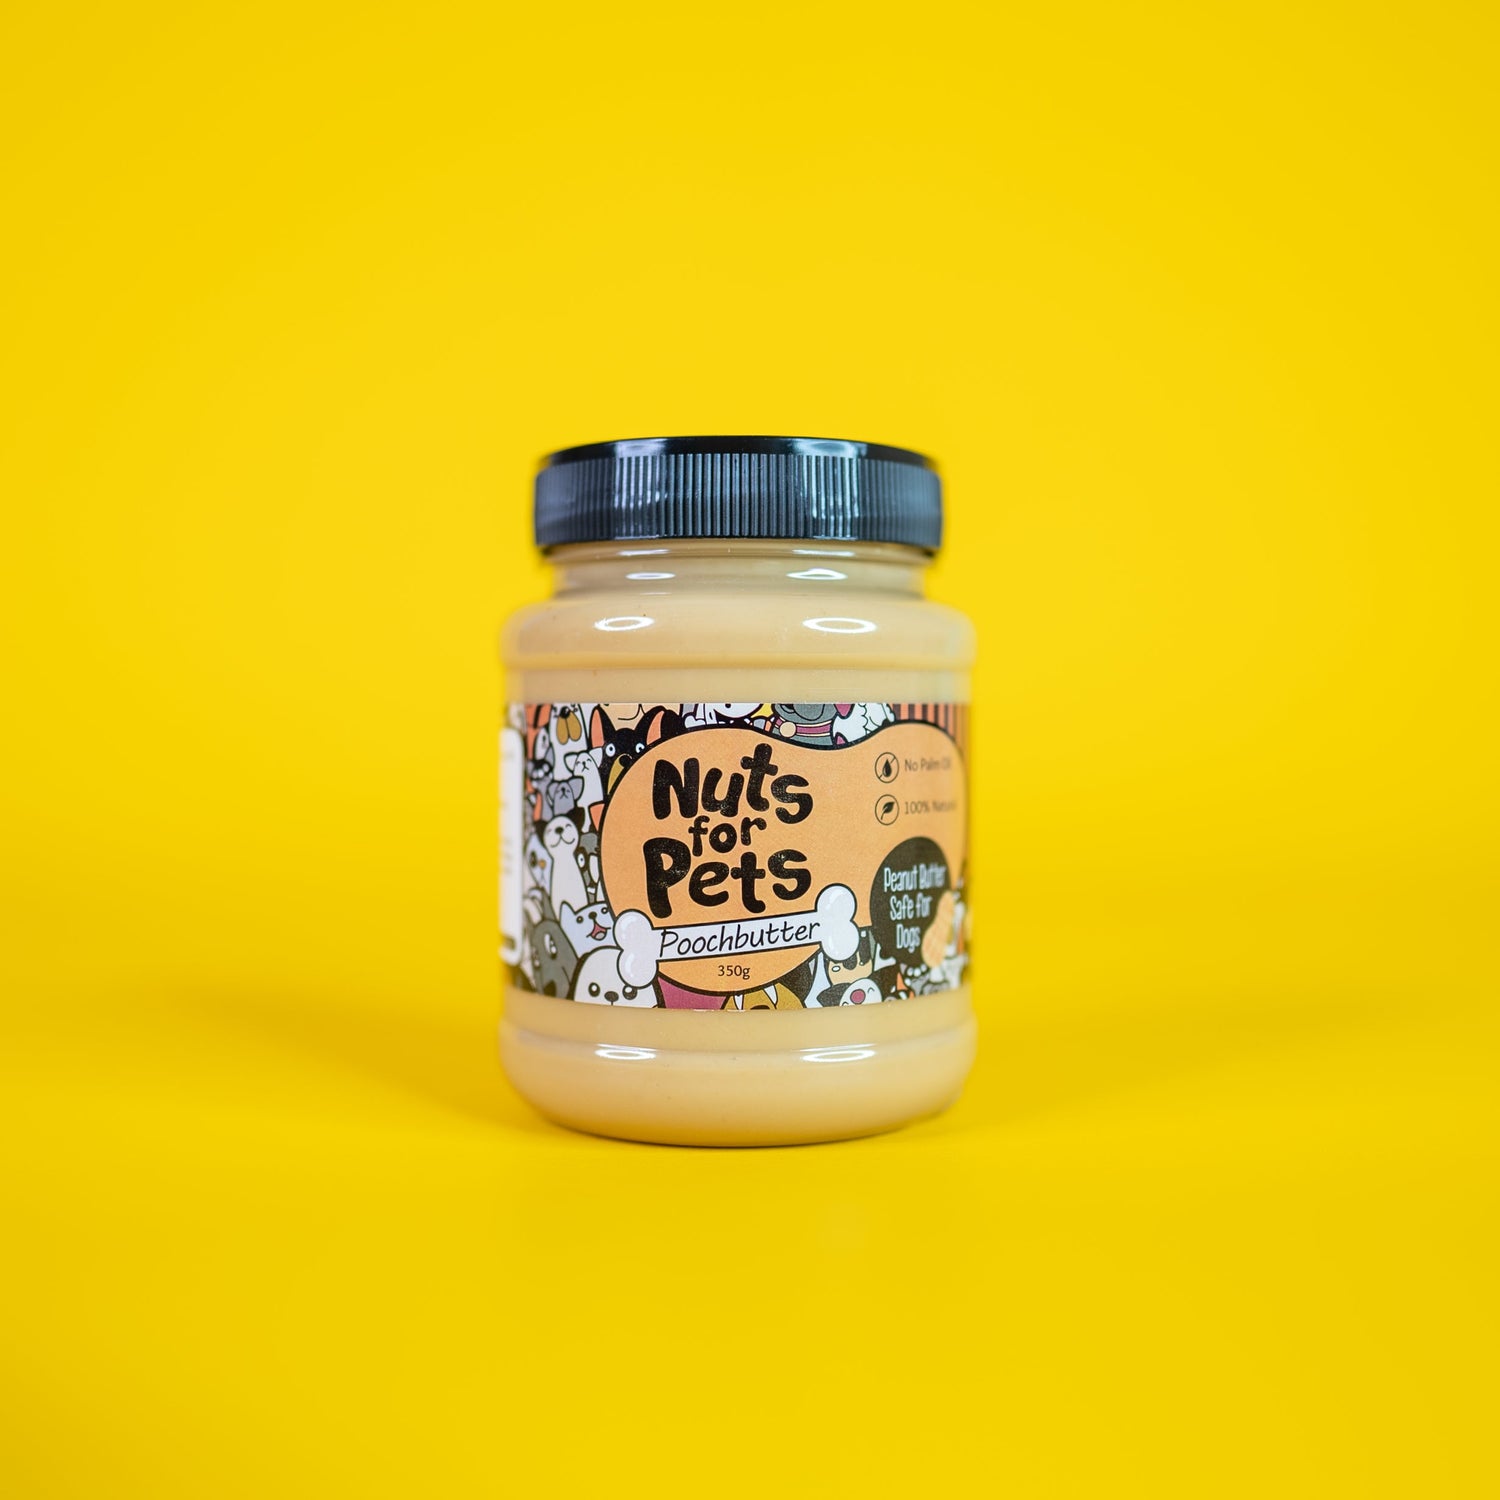 Carrot Cake Mix, Nuts For Pets Butter & Carrot Toy Gift box - Doggy Baking Co by The Bottled Baking Co